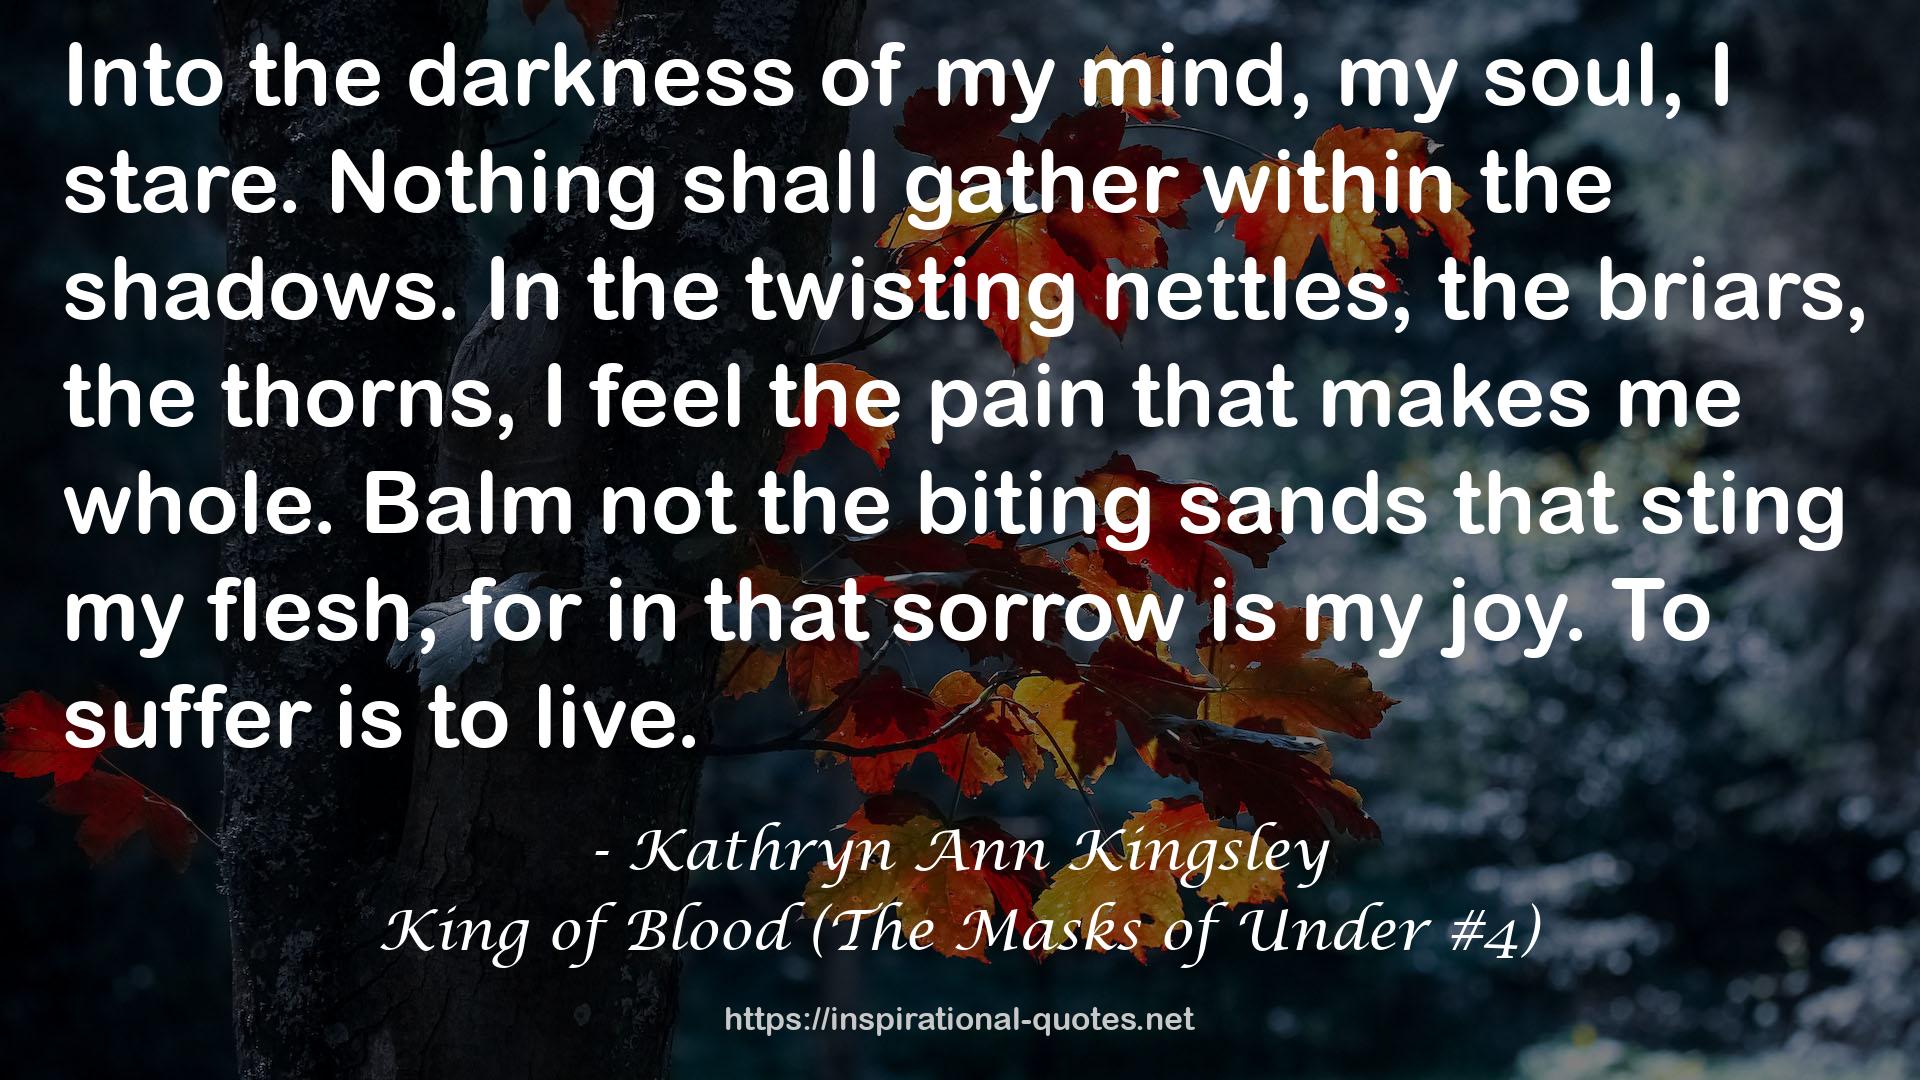 King of Blood (The Masks of Under #4) QUOTES